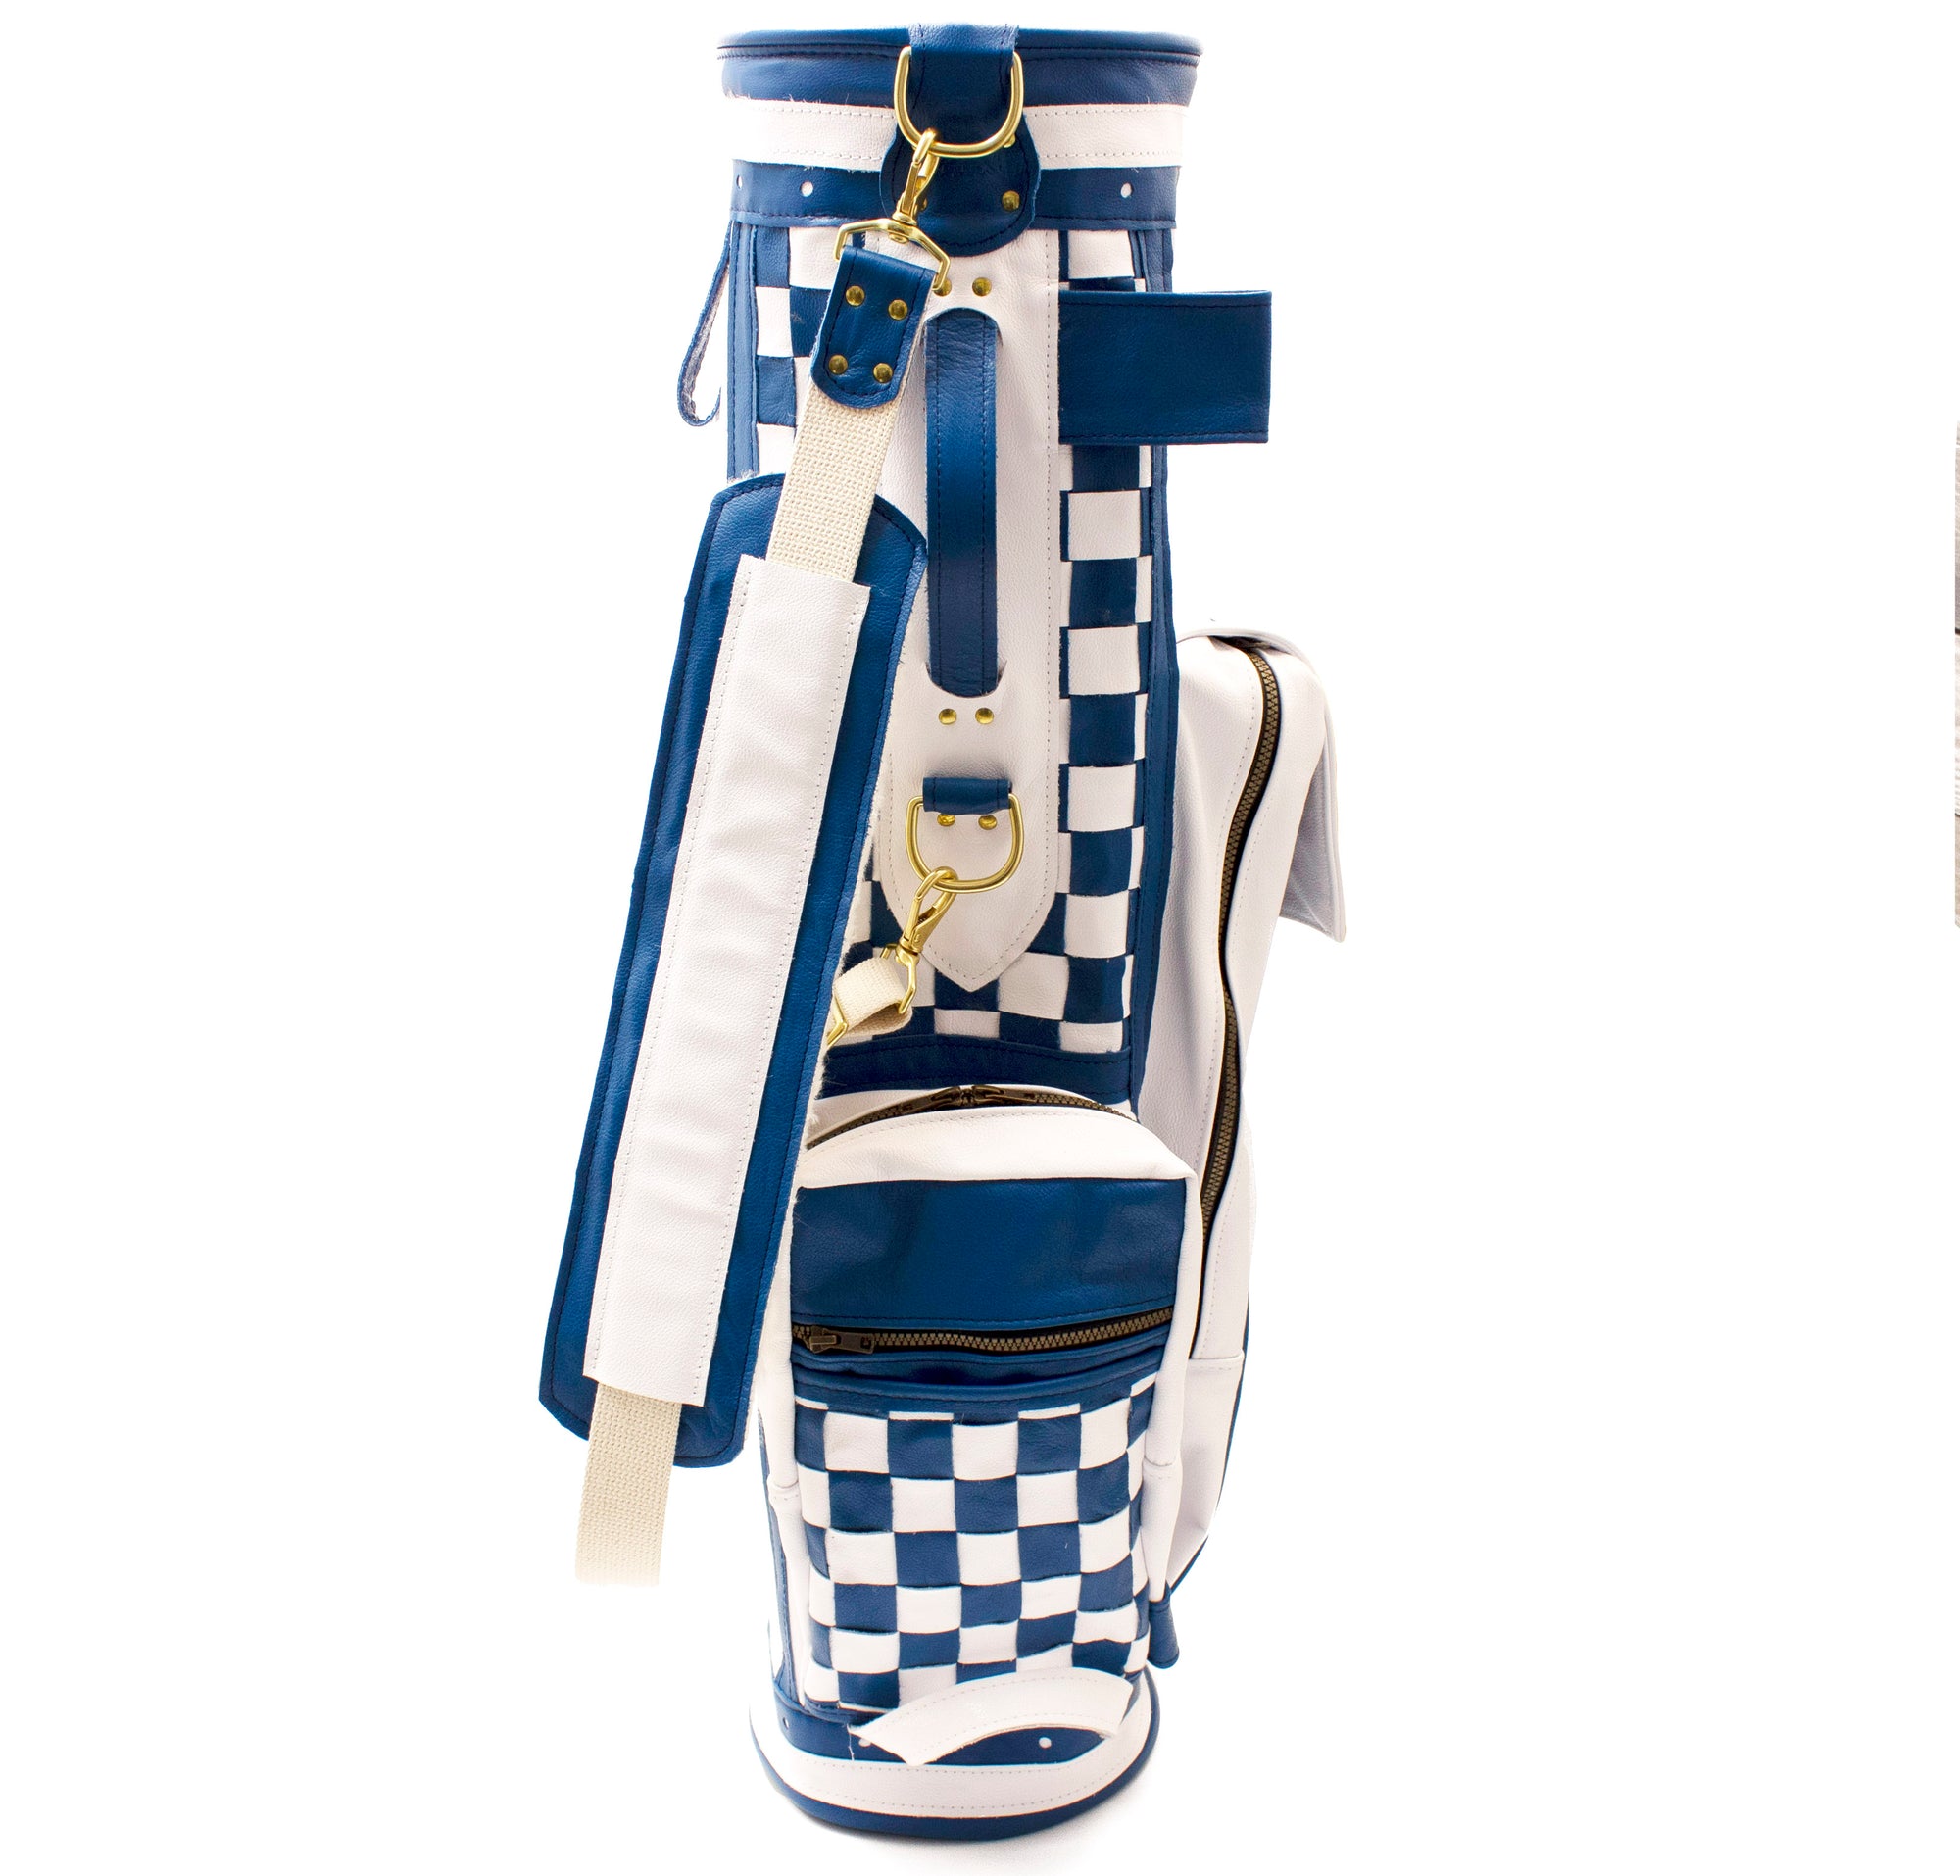 Louisville's Steurer & Jacoby golf bags carried by presidents & stars